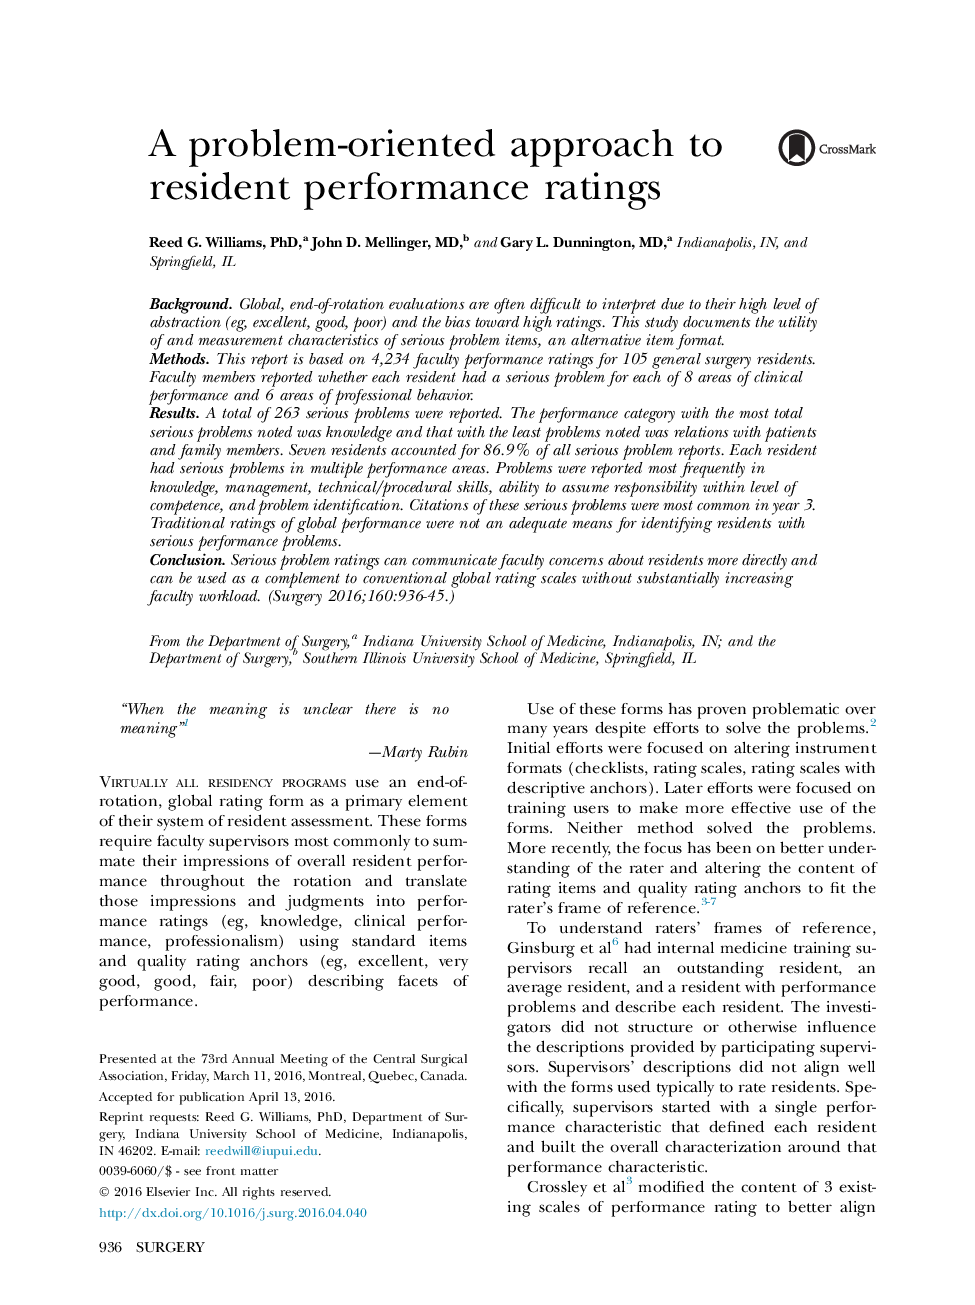 A problem-oriented approach to resident performance ratings